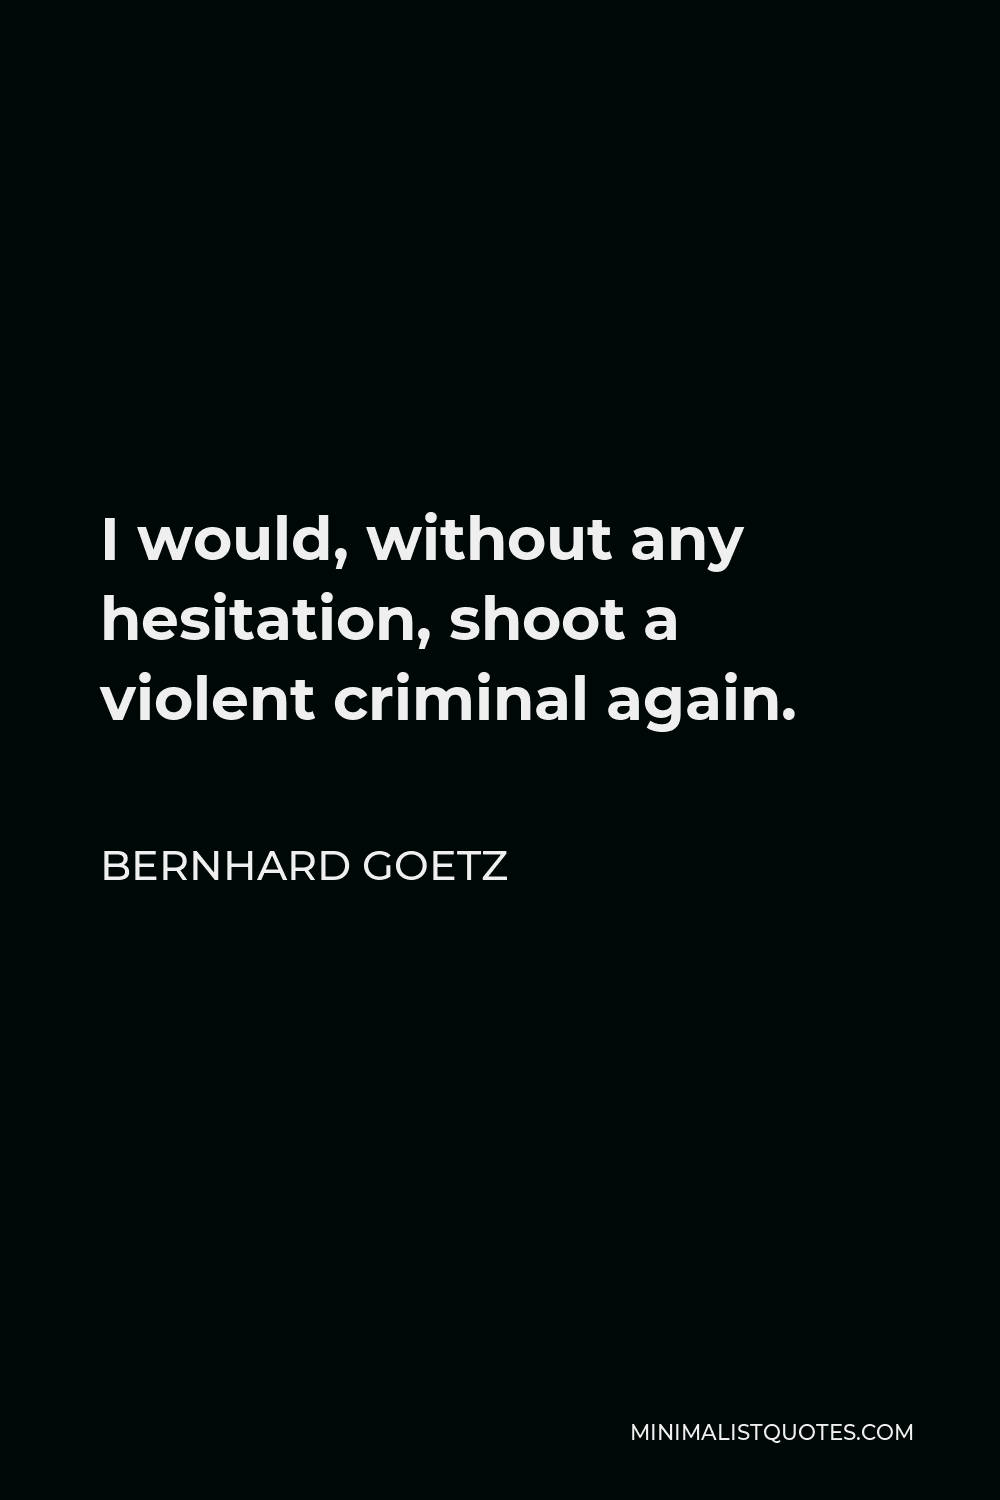 Bernhard Goetz Quote - I would, without any hesitation, shoot a violent criminal again.